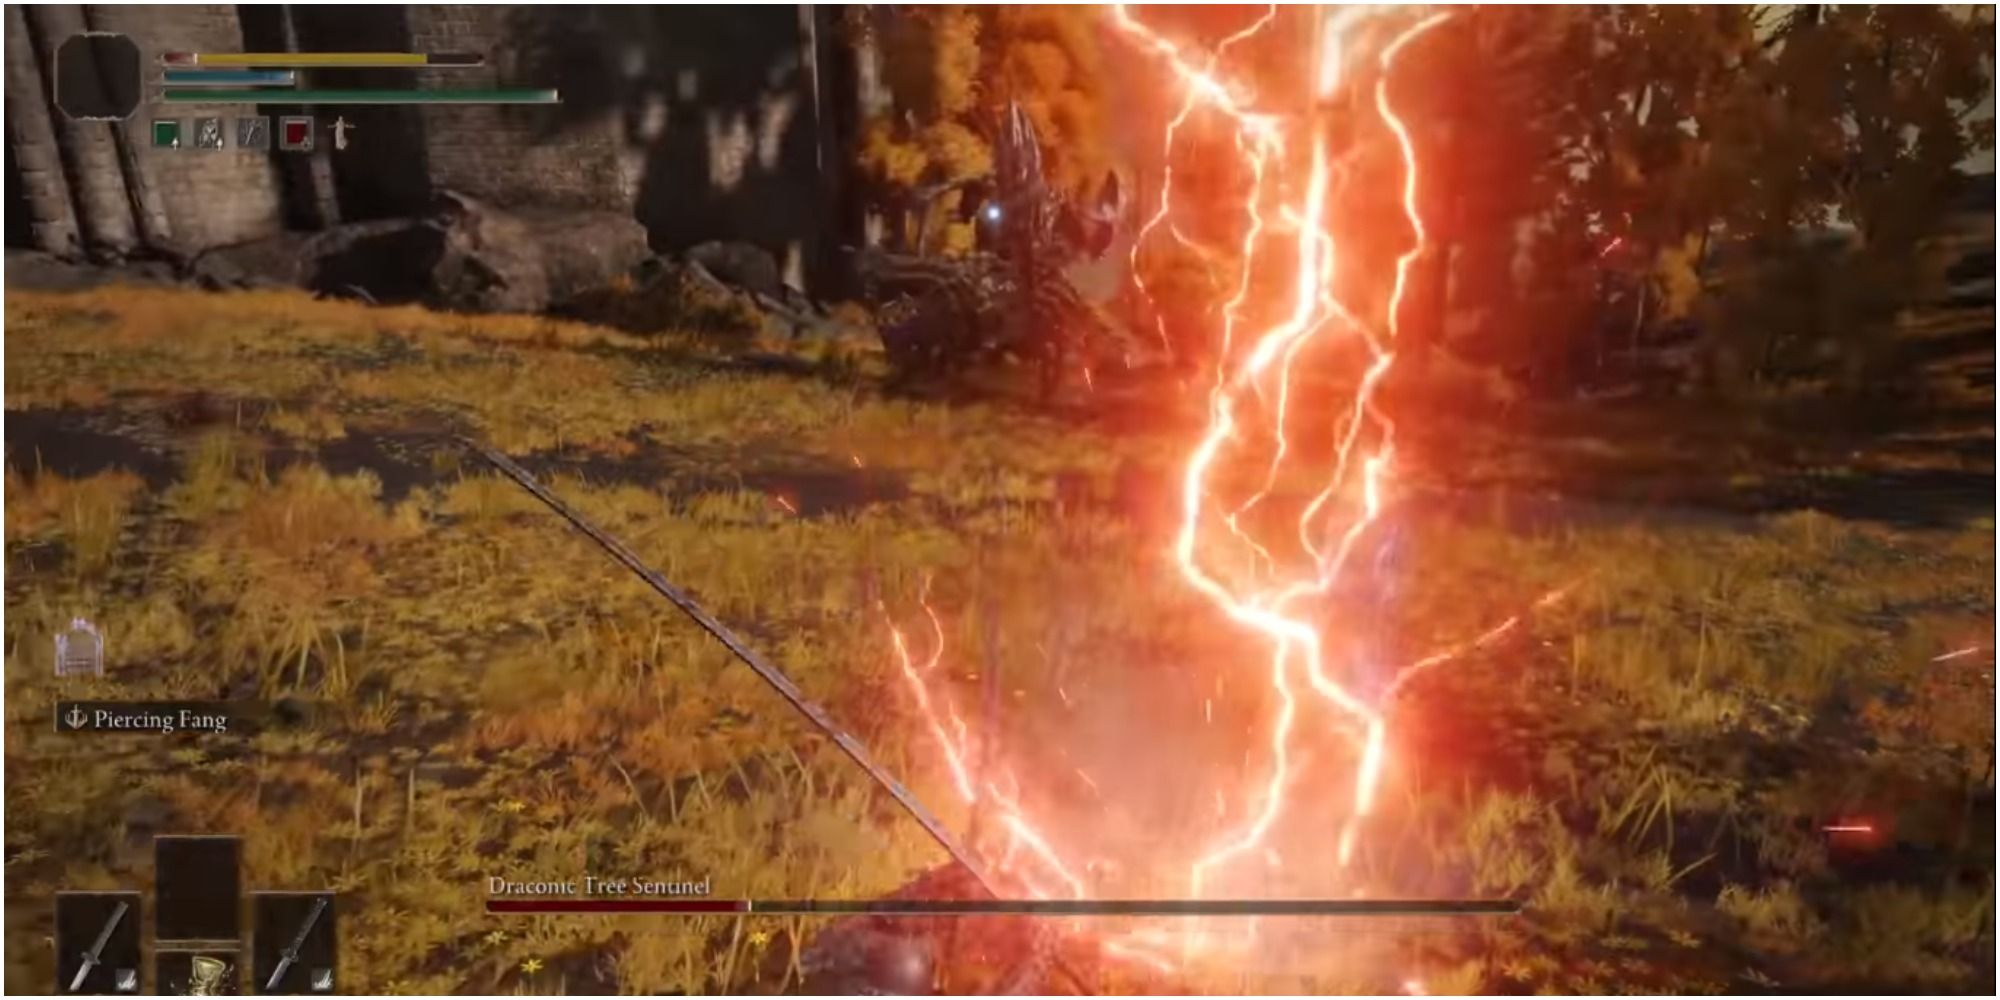 The boss casting a lightning attack on the player.